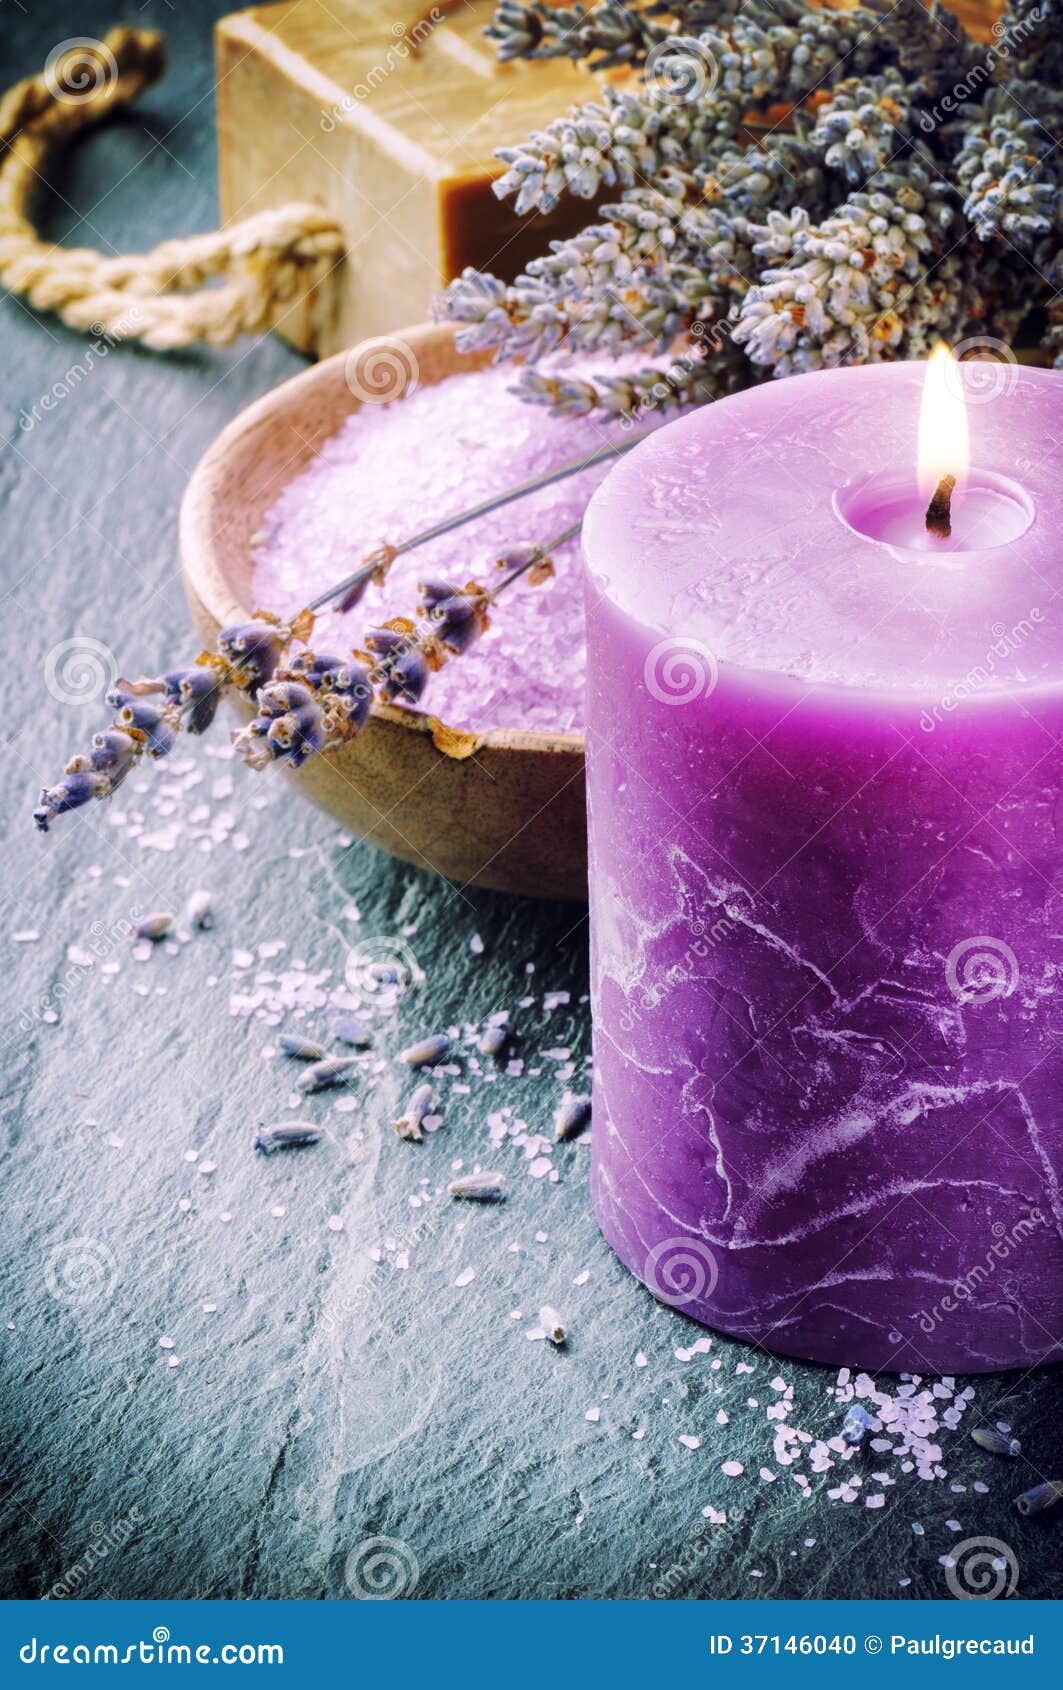 Wellness Concept With Lavender And Scented Candle Stock Photo ...